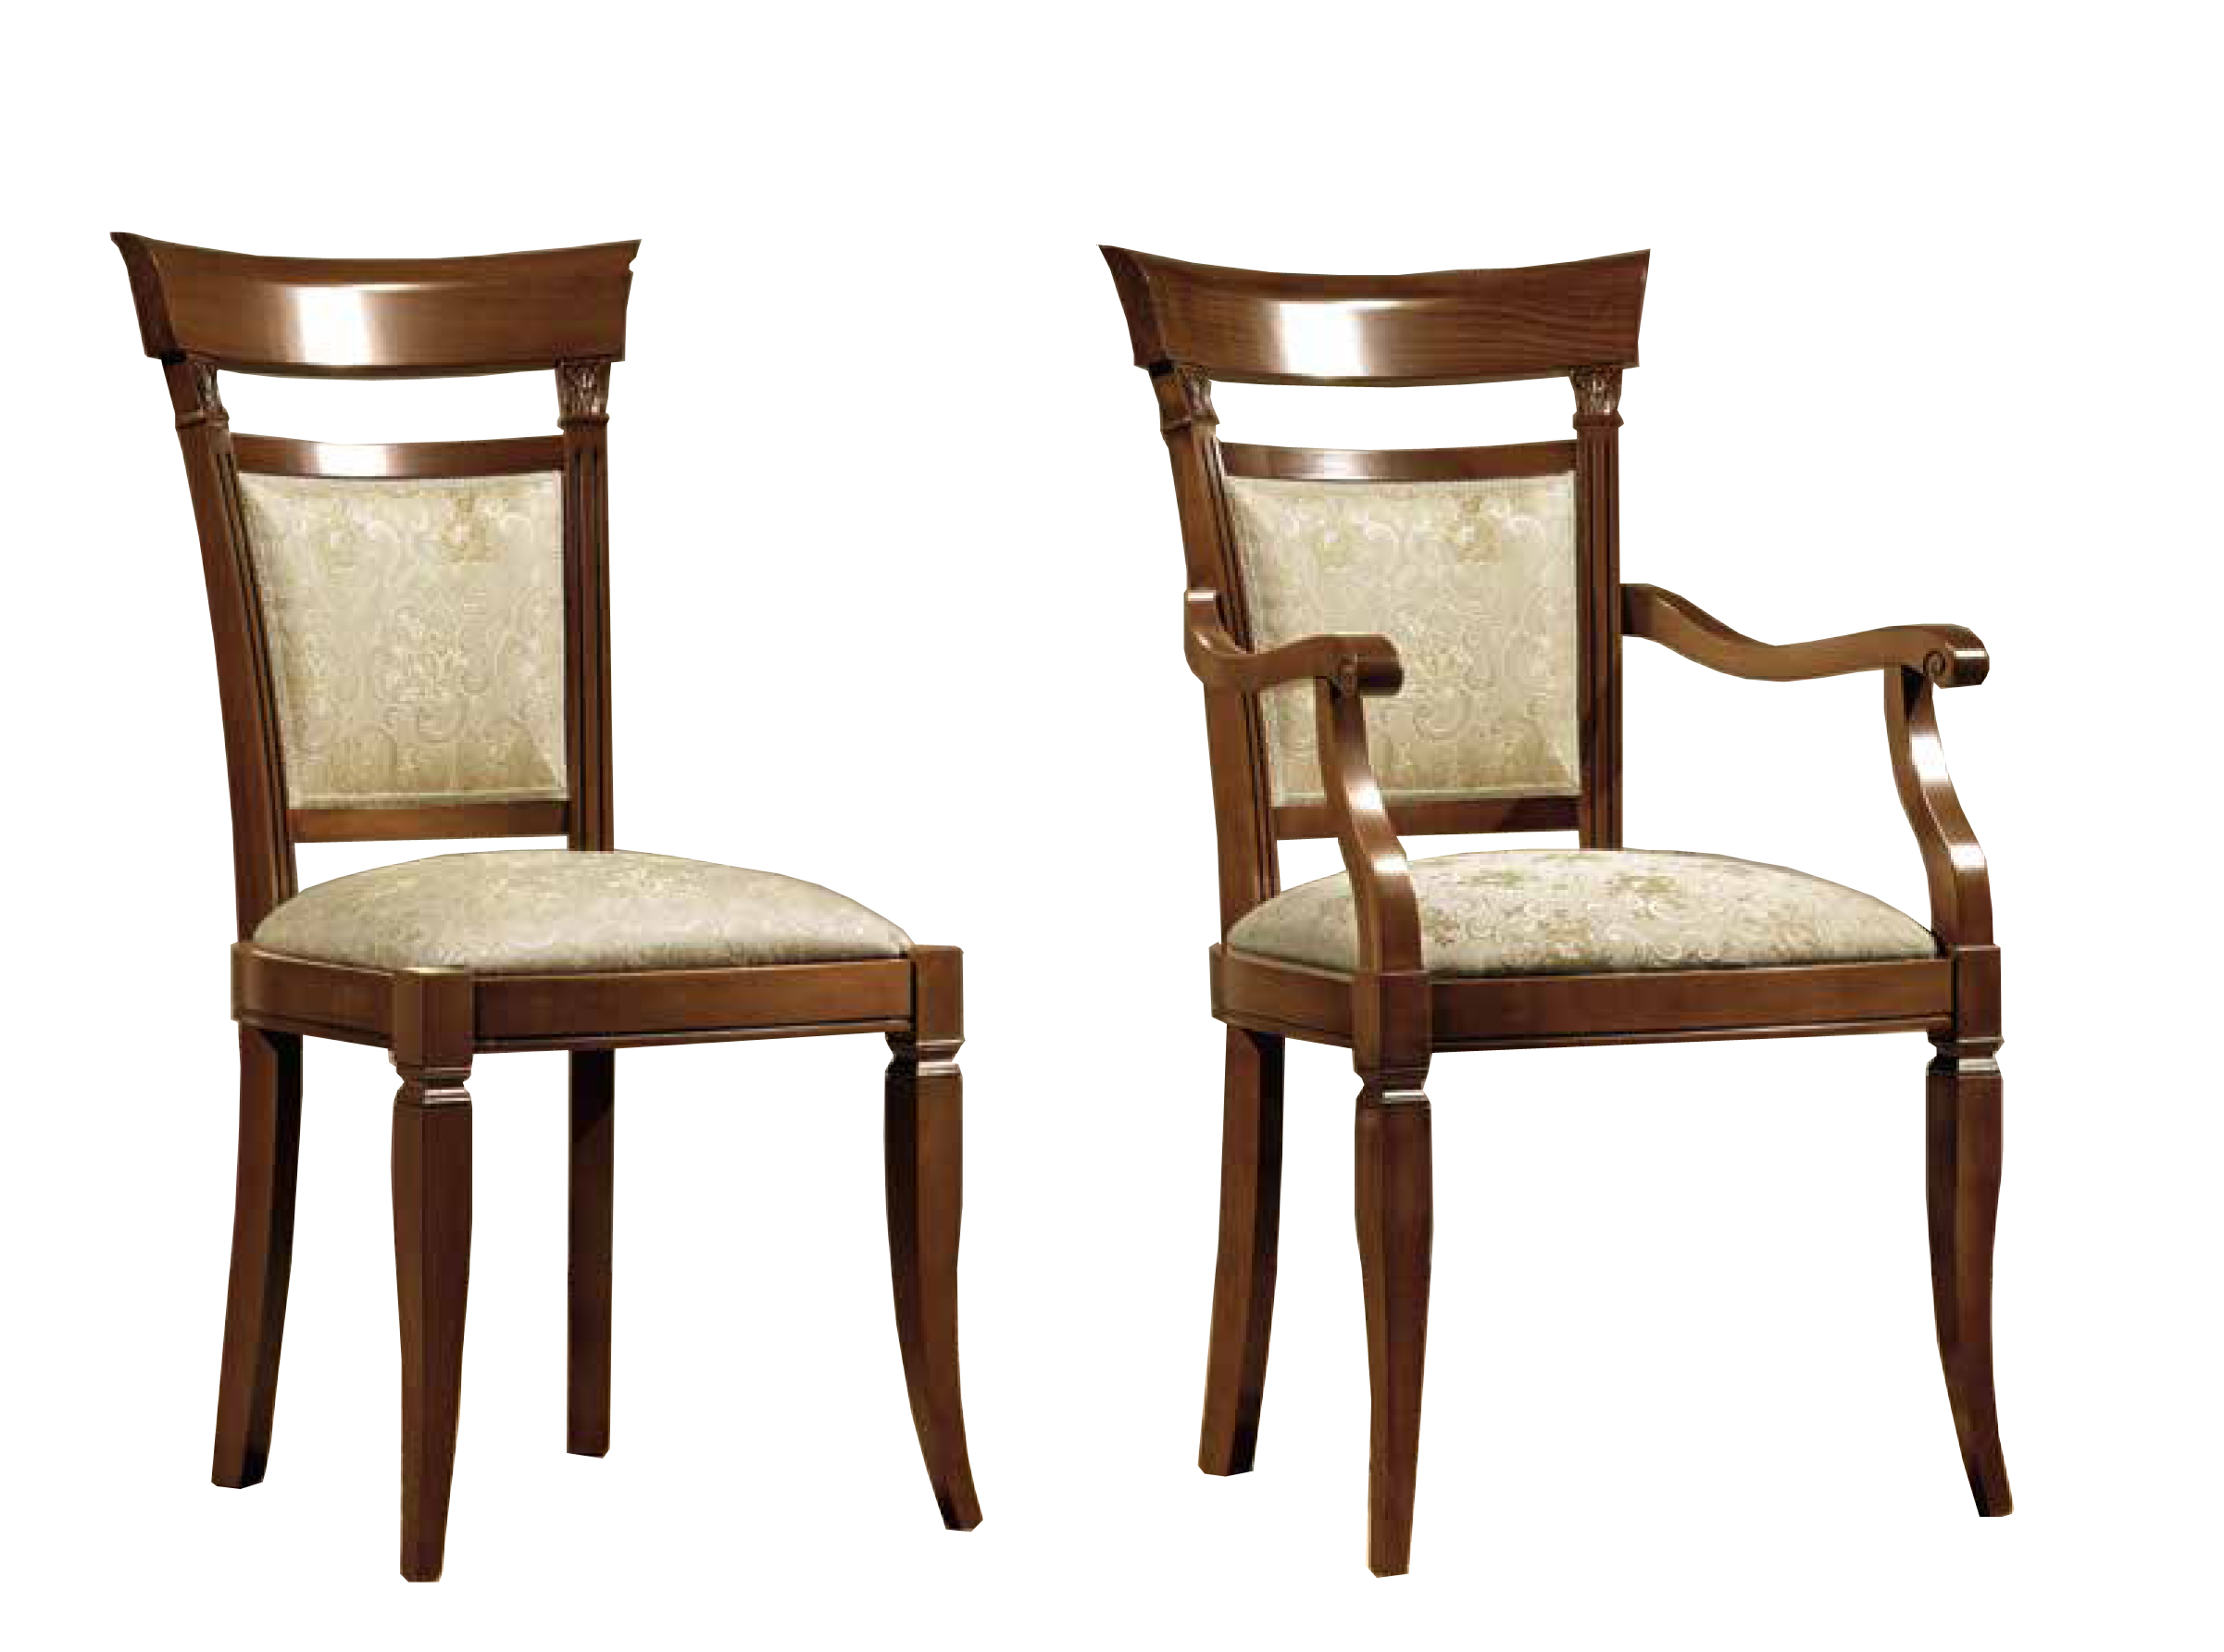 Brands Garcia Laurel & Hardy Tables Treviso Chairs Cherry